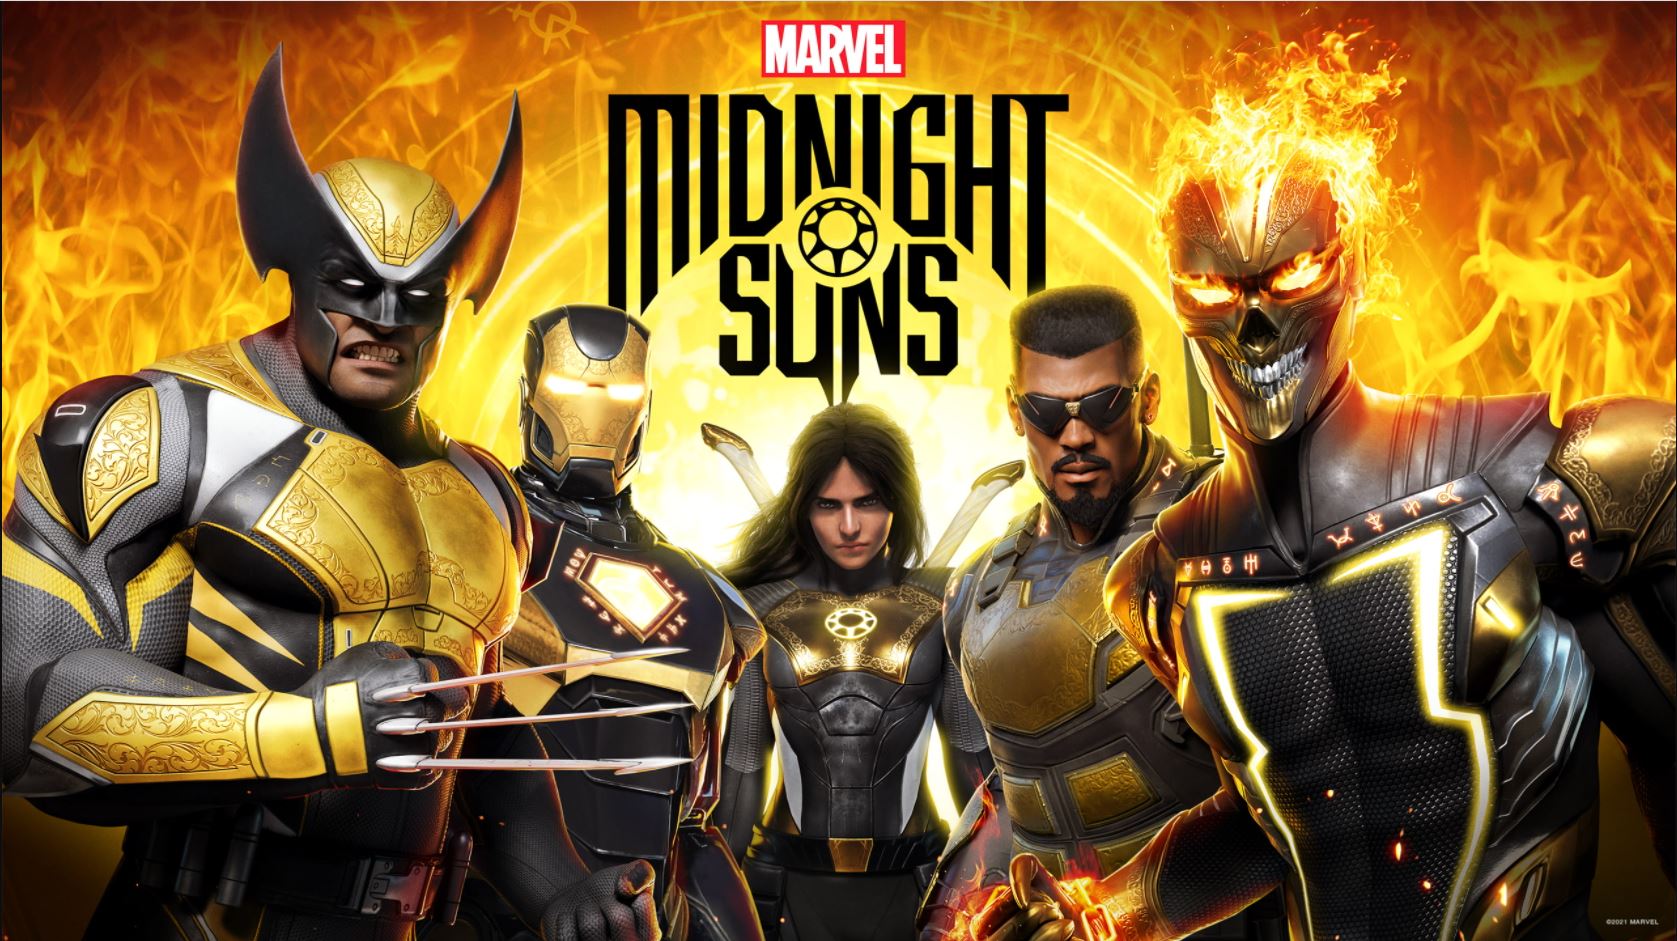 Marvel's Midnight Suns - The first game shows the tactical card-based combat system